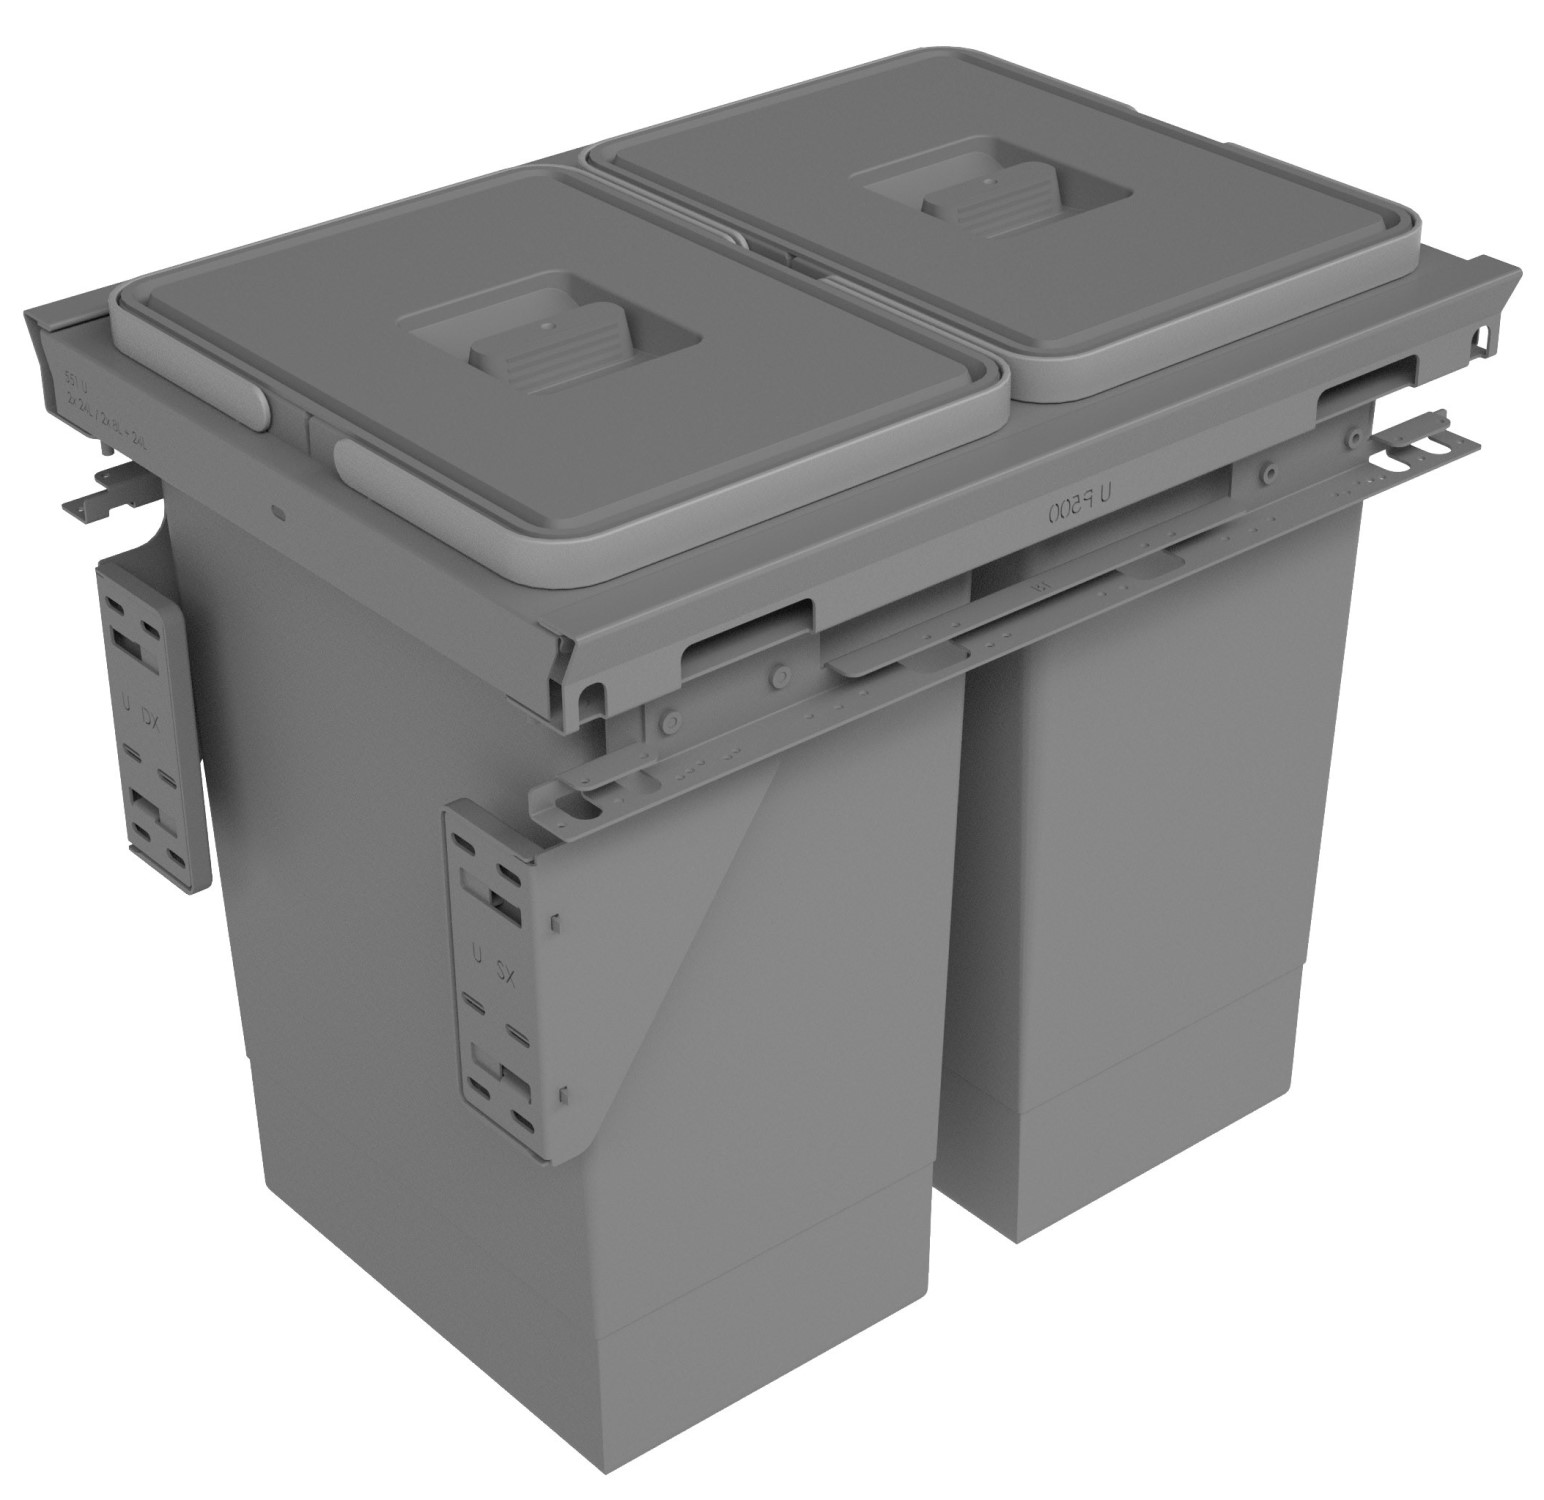 Sige pull-out waste bin, 2 bins 32L, anthracite